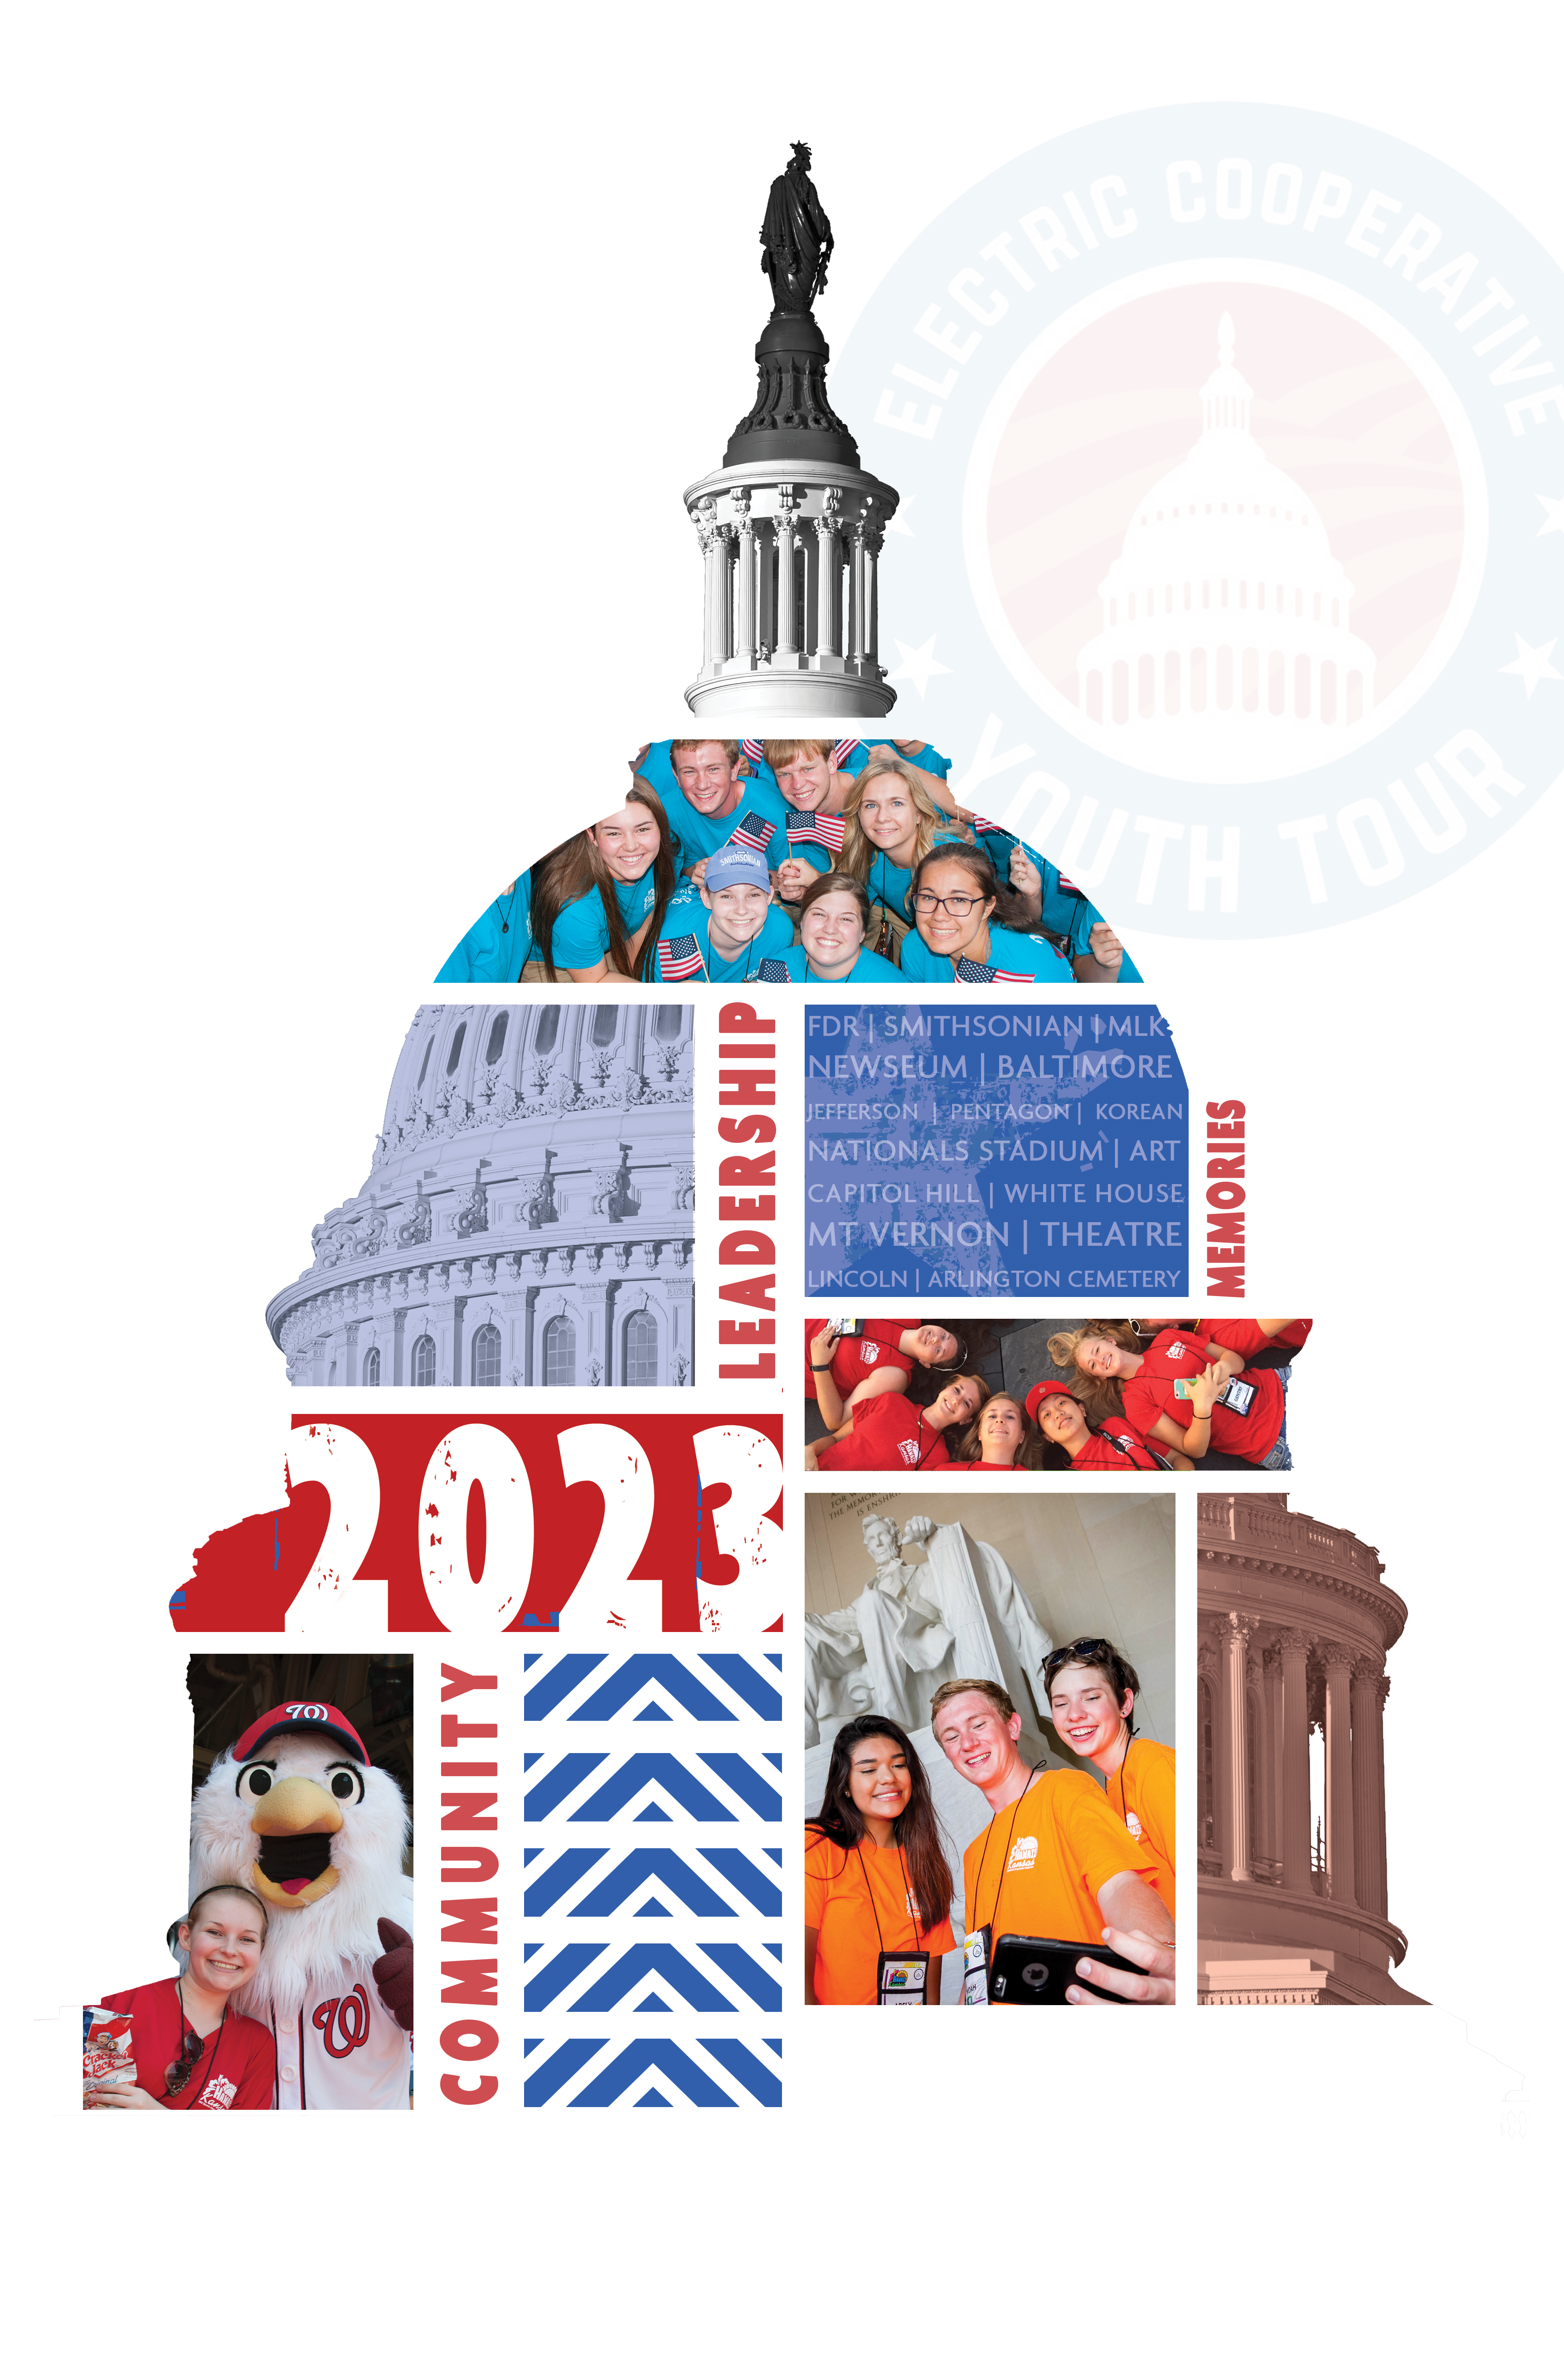 Washington, D.C. graphic with inset images of Electric Cooperative Youth Tour